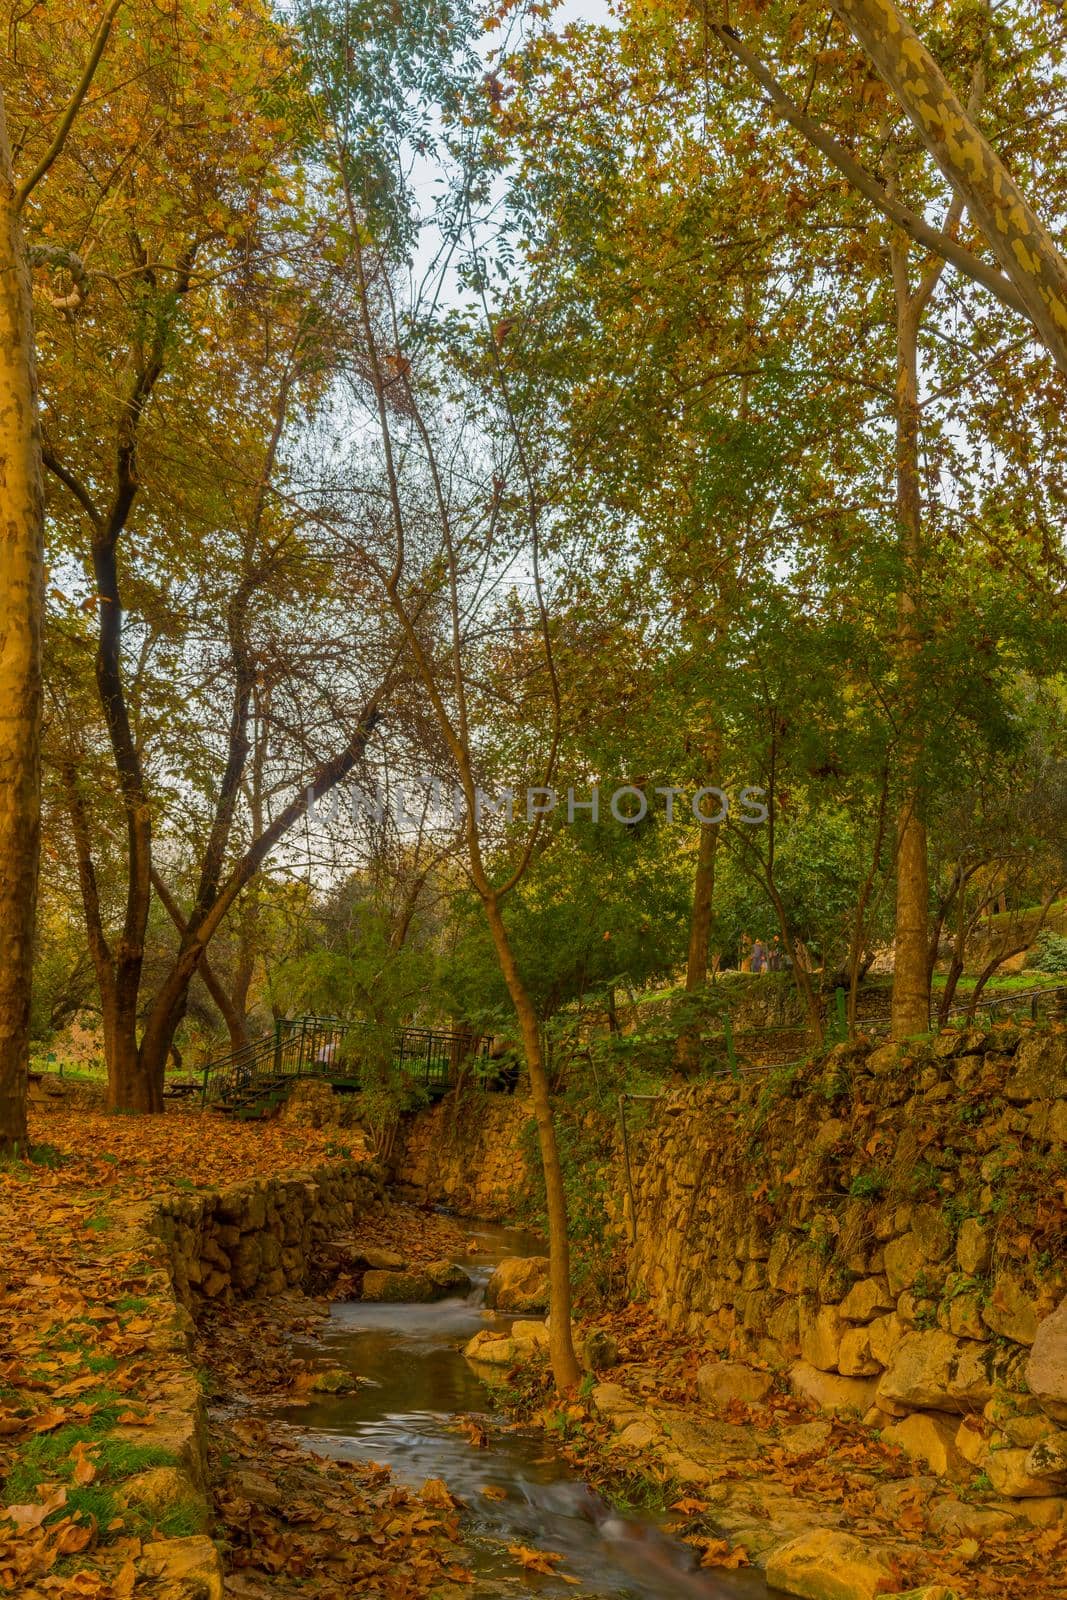 View of the Kesalon Stream with trees, and fall foliage, in En Hemed National Park (Aqua Bella), west of Jerusalem, Israel